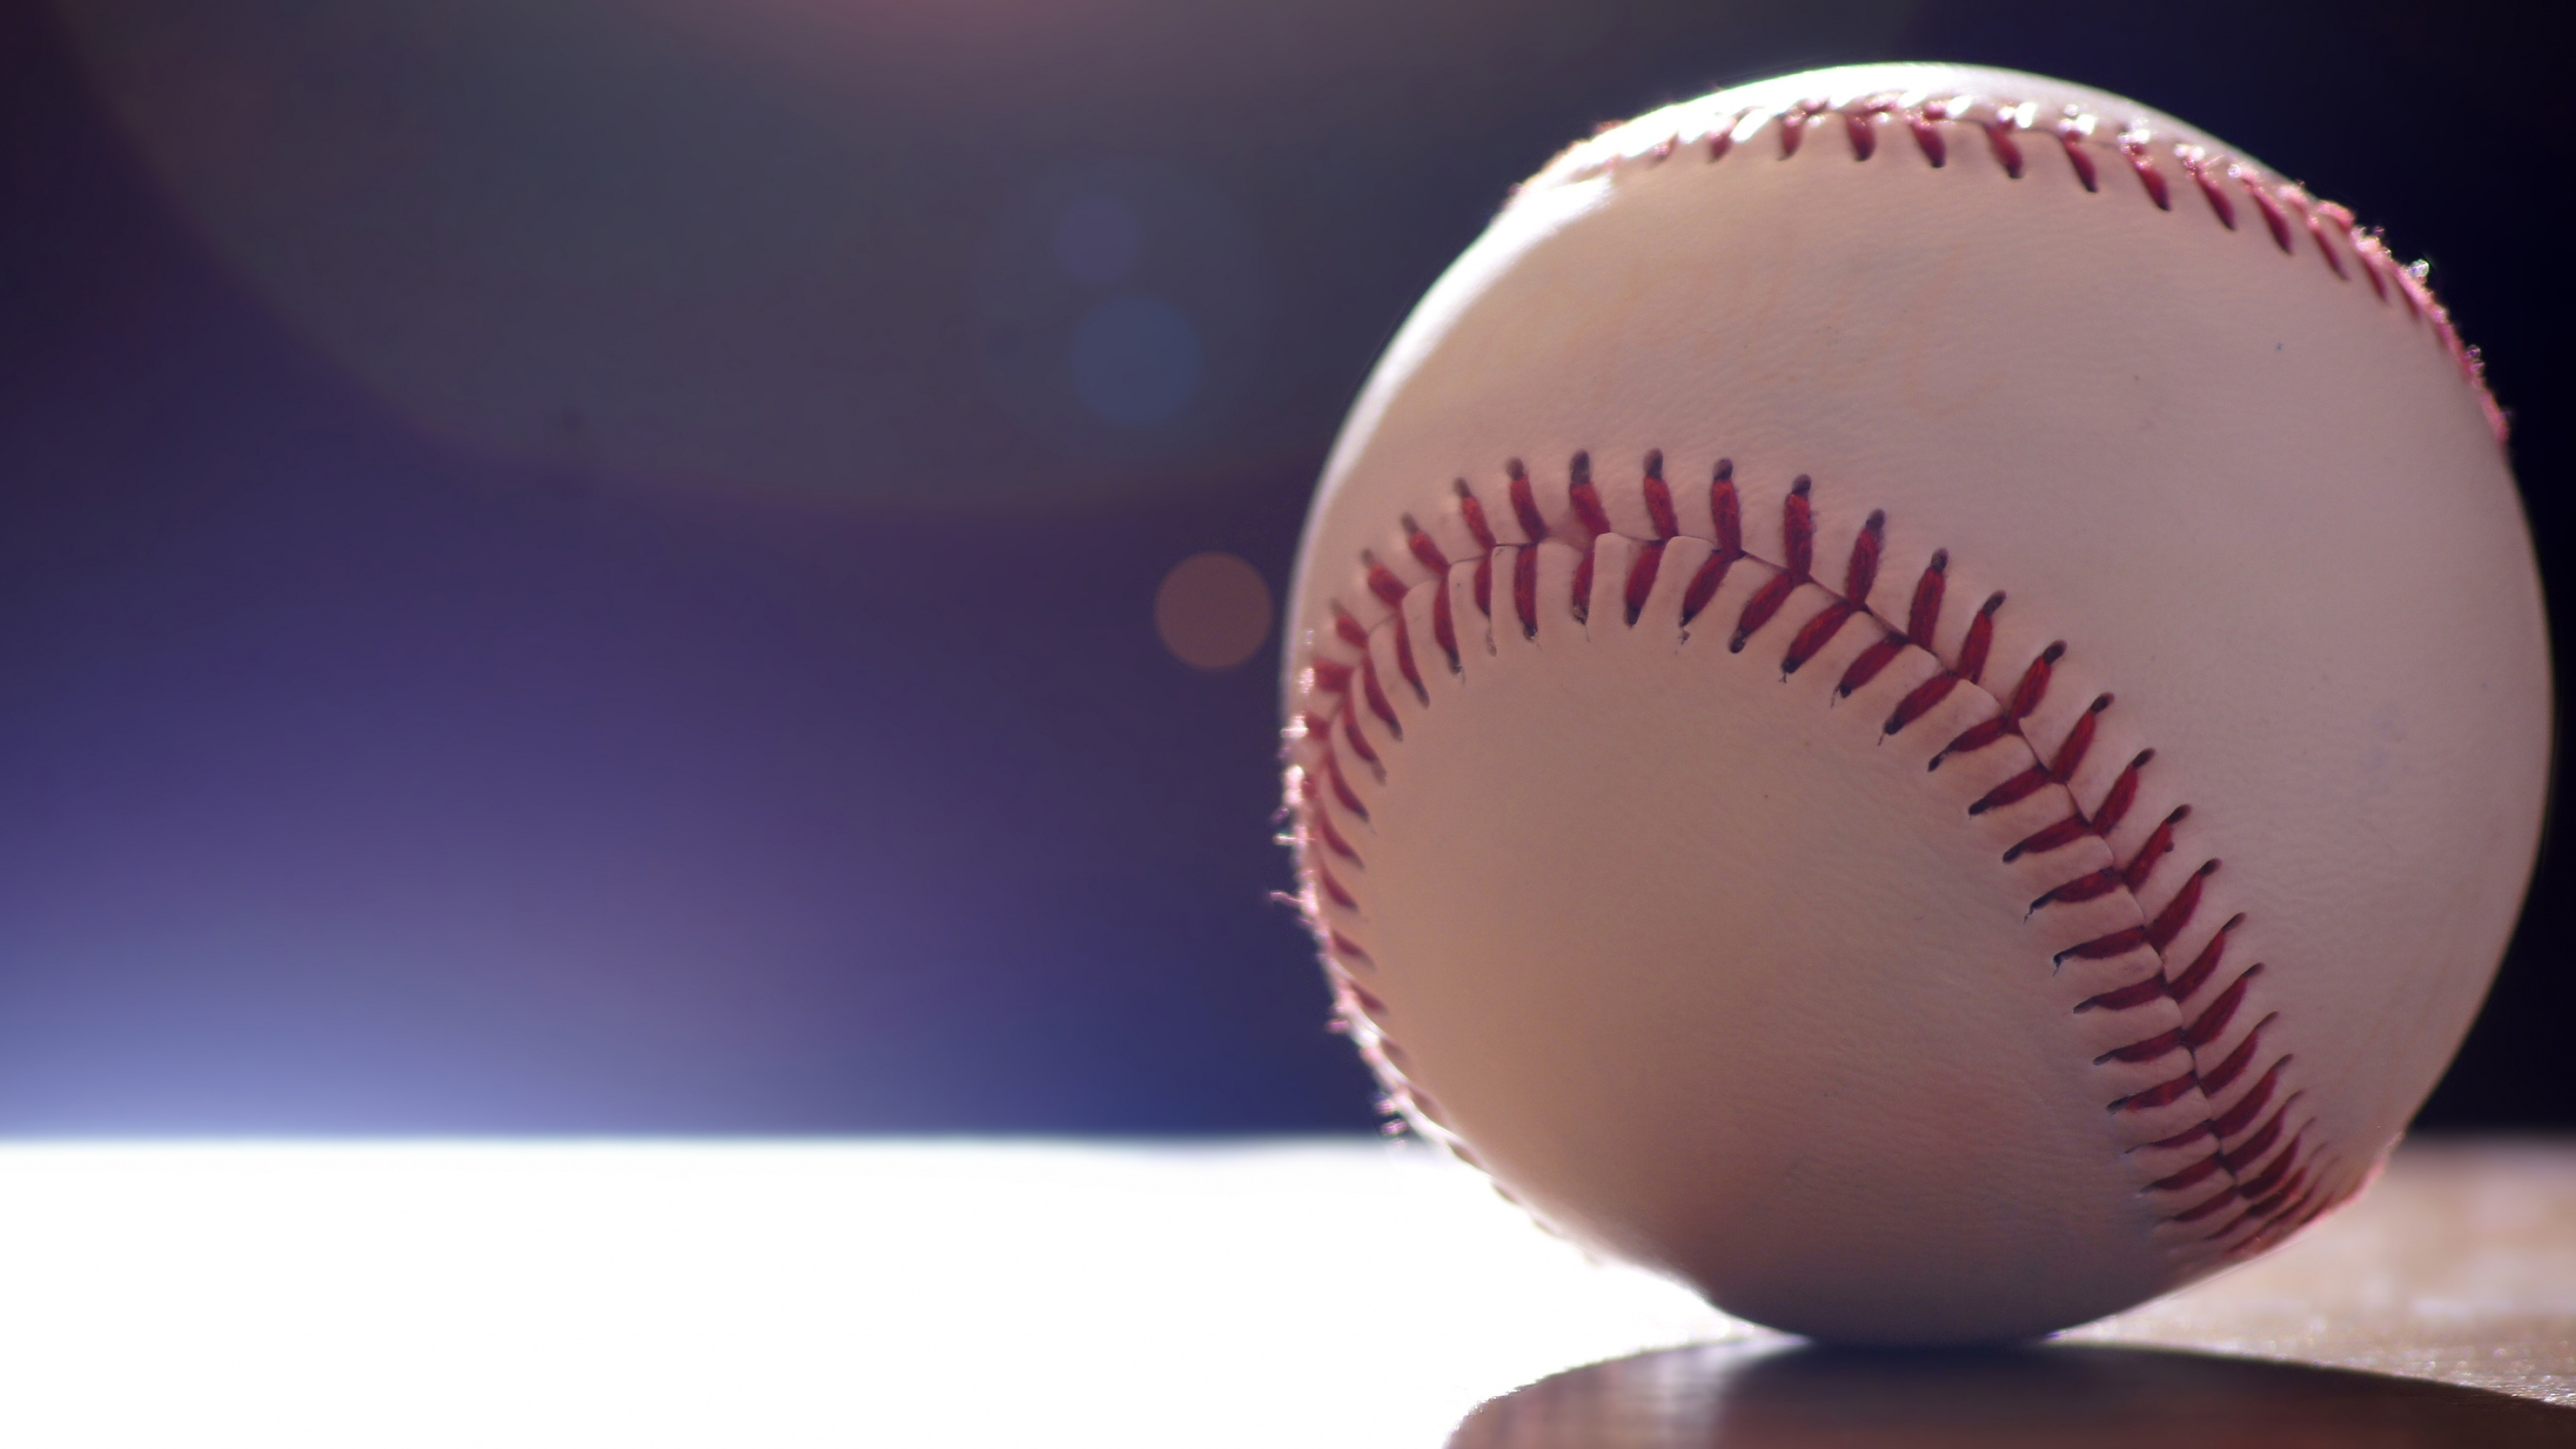 Softball: Similar-to-baseball game played with a larger ball, A bat-and-ball game. 3840x2160 4K Wallpaper.